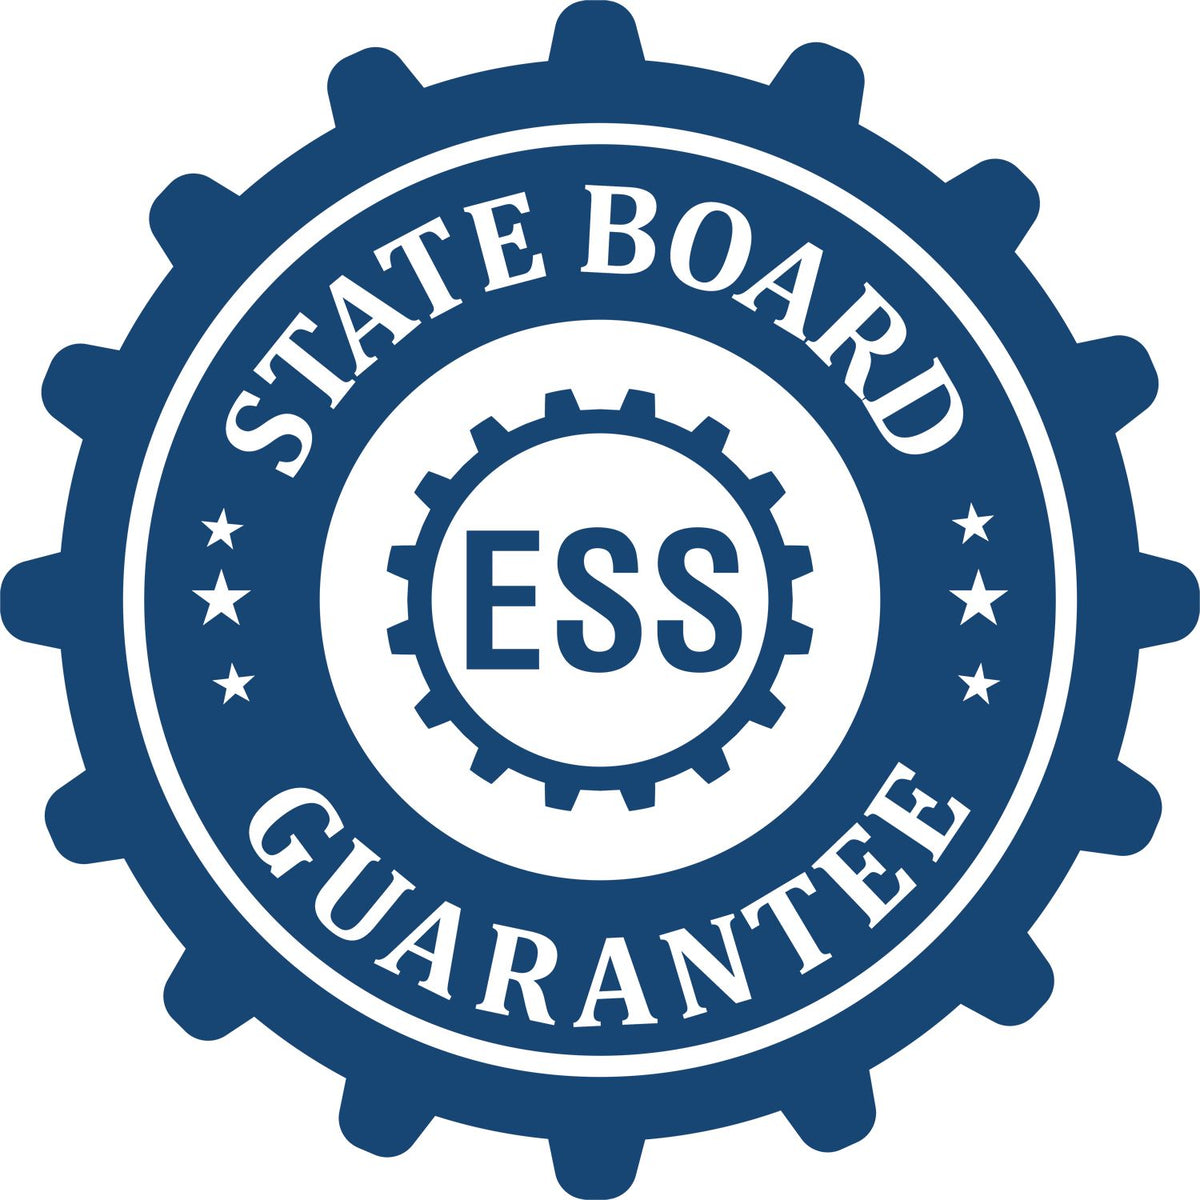 An emblem in a gear shape illustrating a state board guarantee for the Heavy-Duty California Rectangular Notary Stamp product.